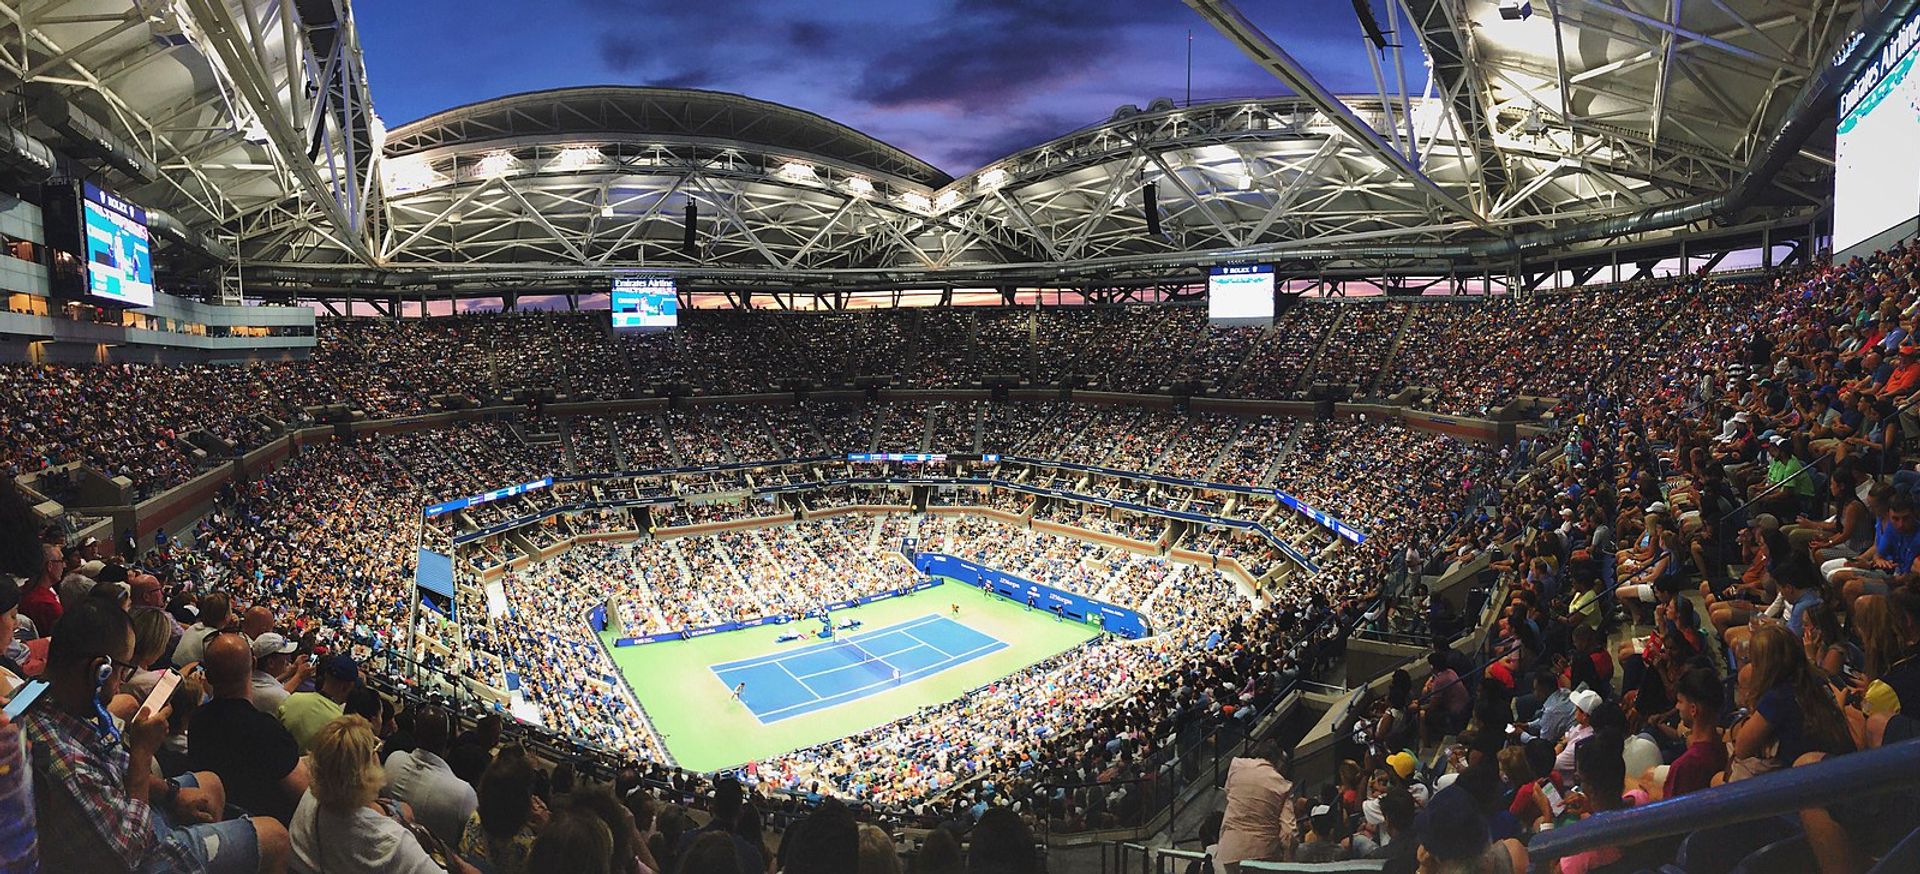 The US Open, 2019. Photo, Wikimedia Commons